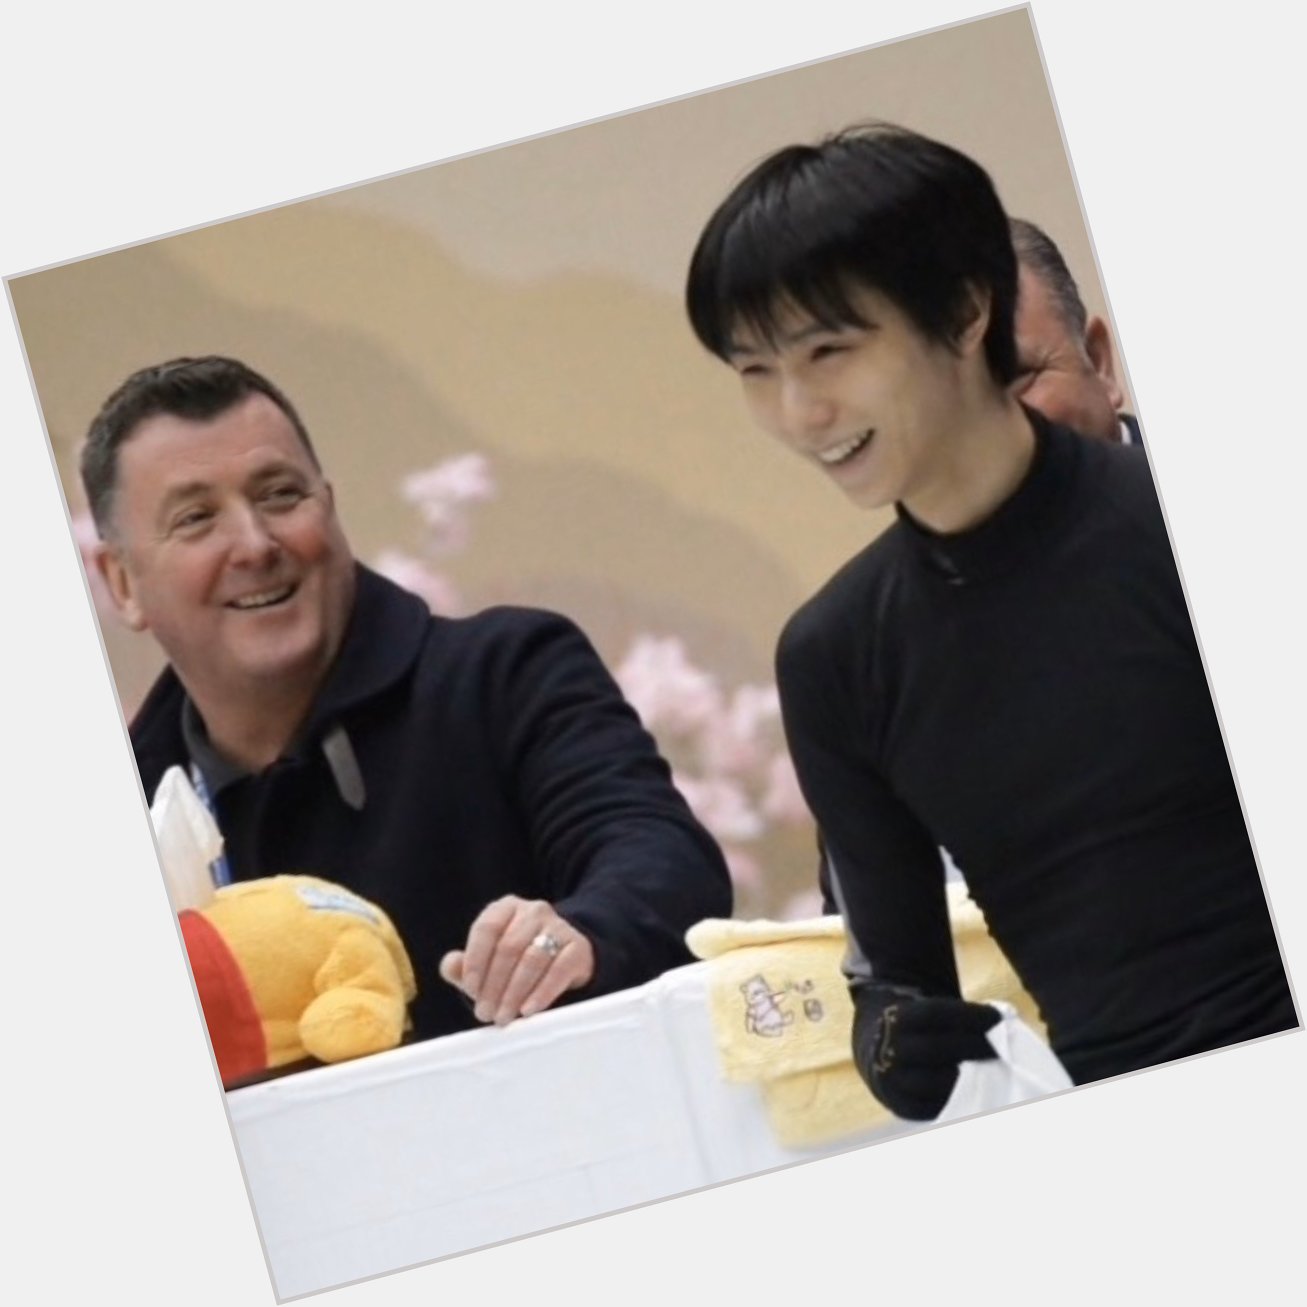 Happy birthday to Brian Orser   Best wishes for your health and success   